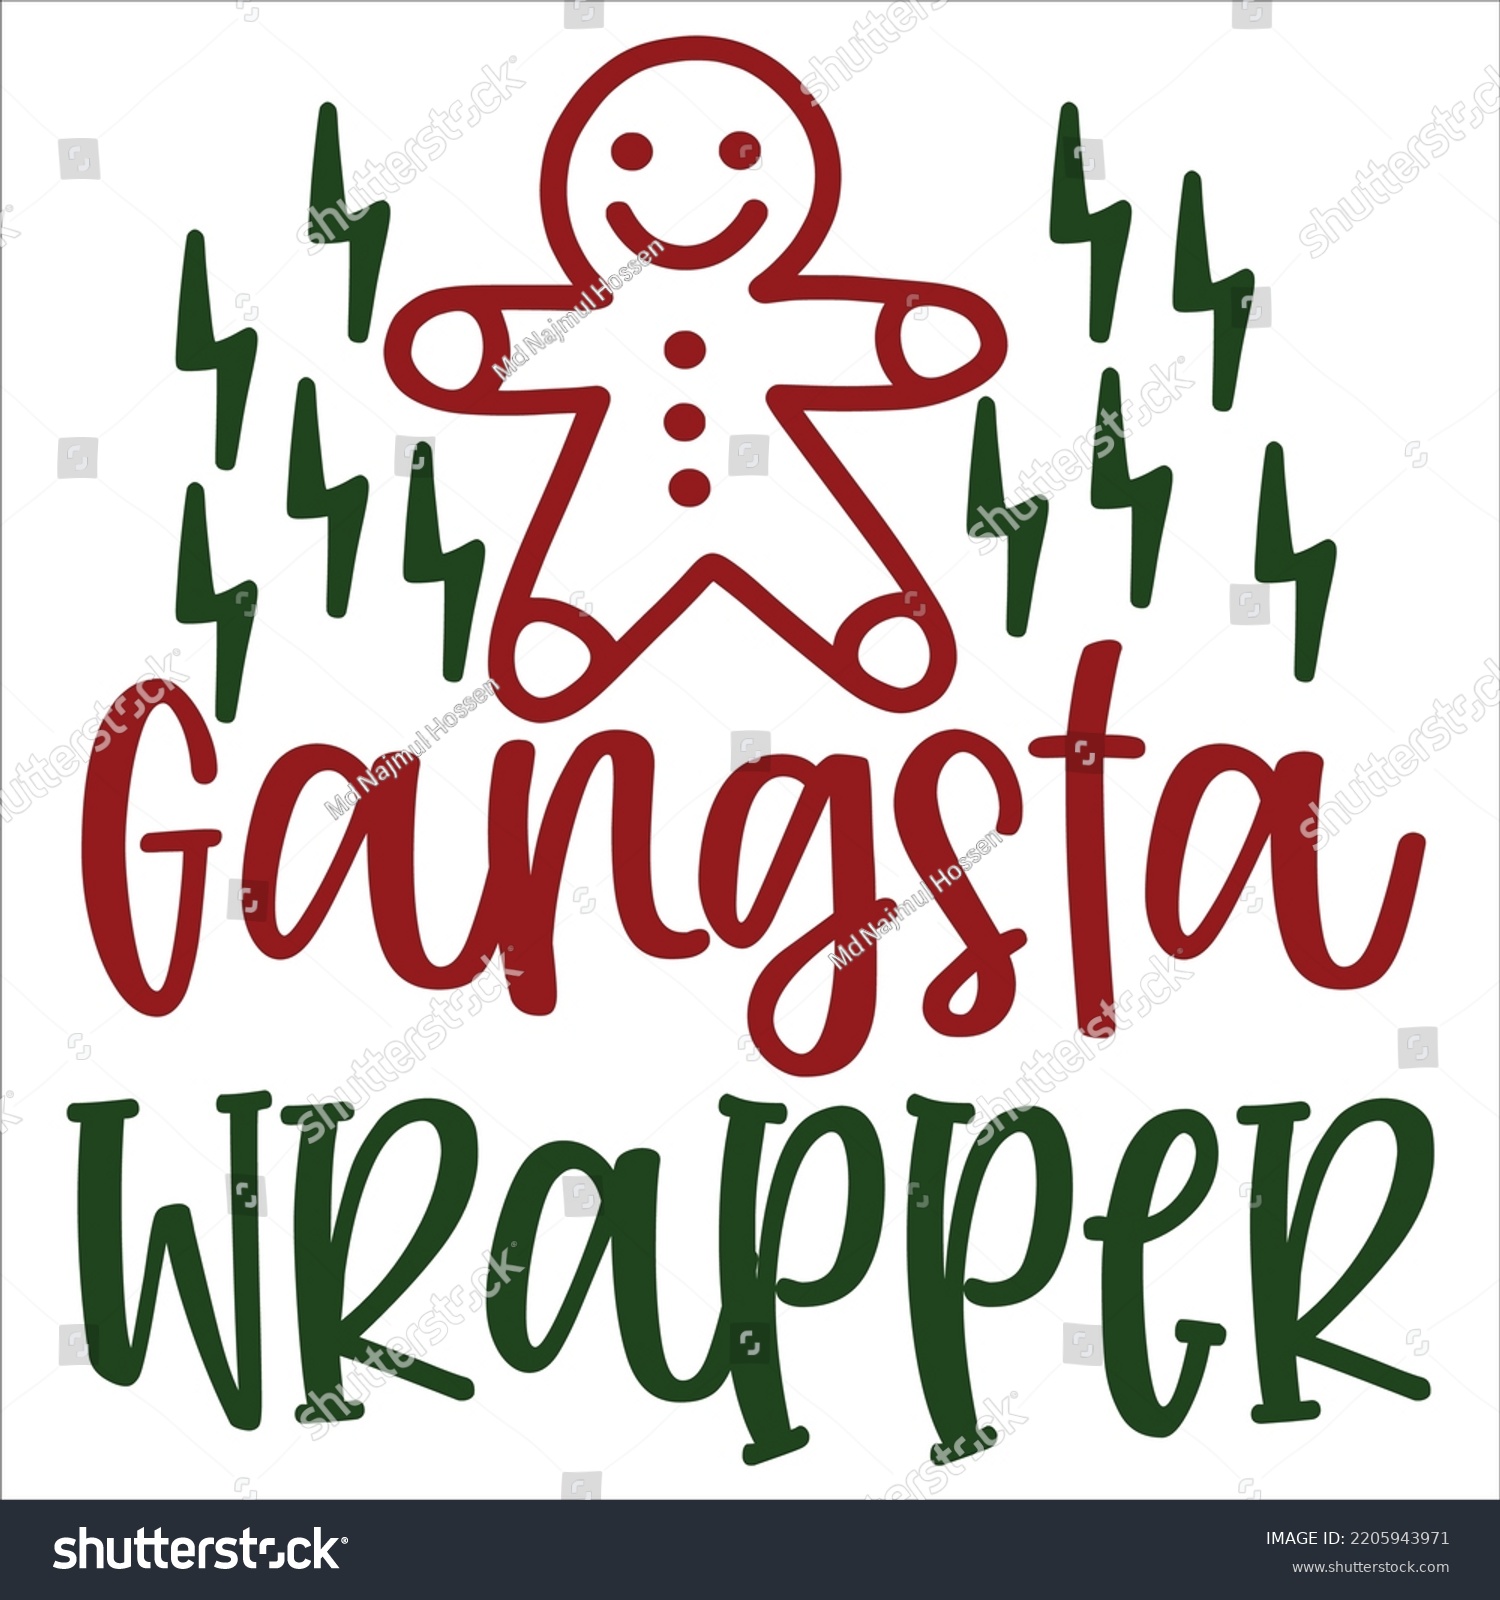 SVG of Gangsta  Wrapper, Merry Christmas shirts, mugs, signs lettering with antler vector illustration for Christmas hand lettered, svg, Christmas svg, Christmas Clipart Silhouette cutting svg